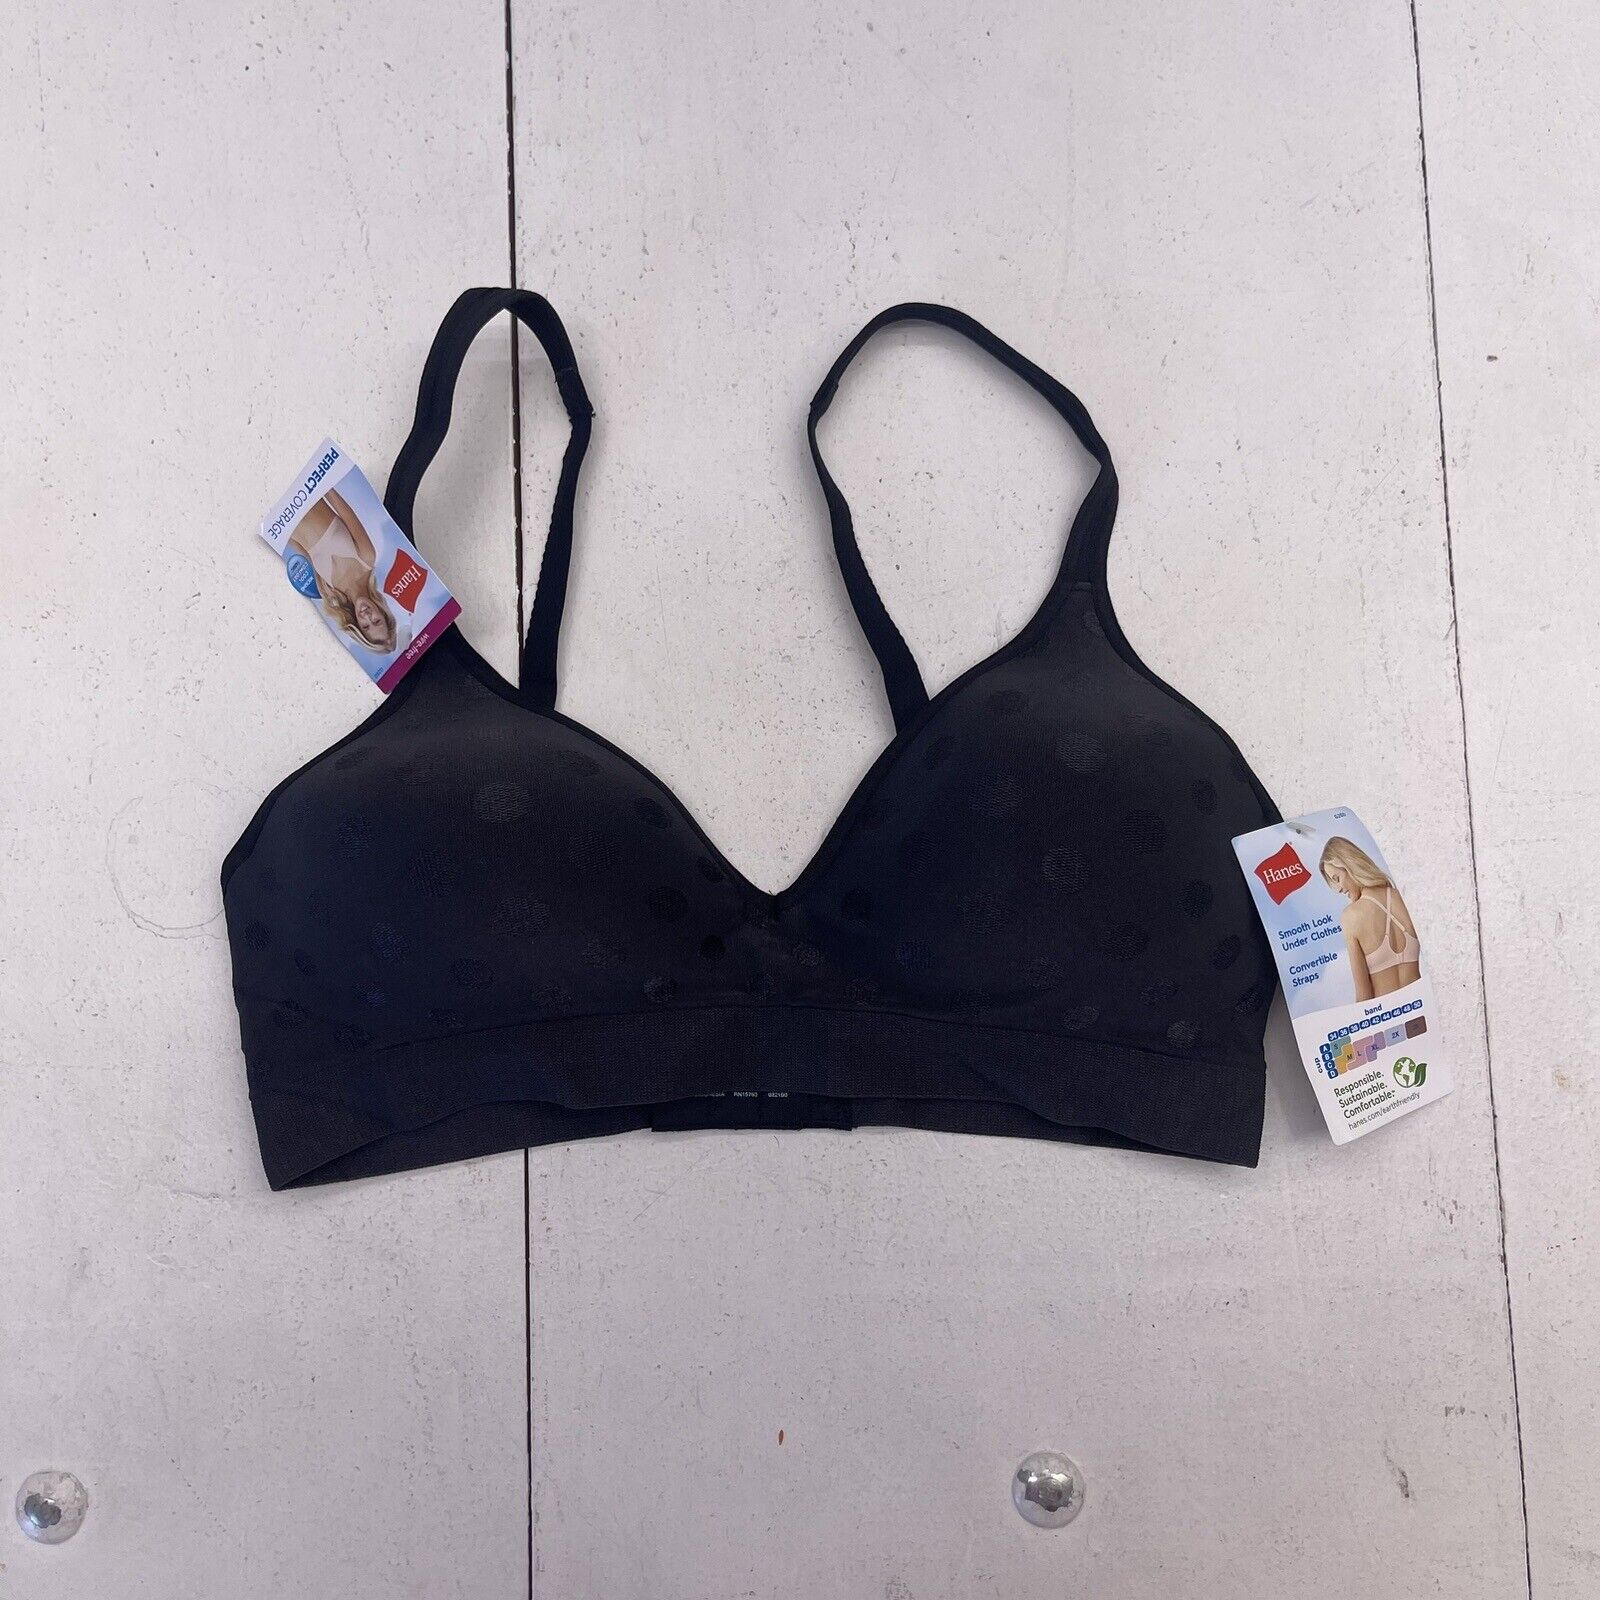 Hanes womens 2 Pack Bras Size 32/M